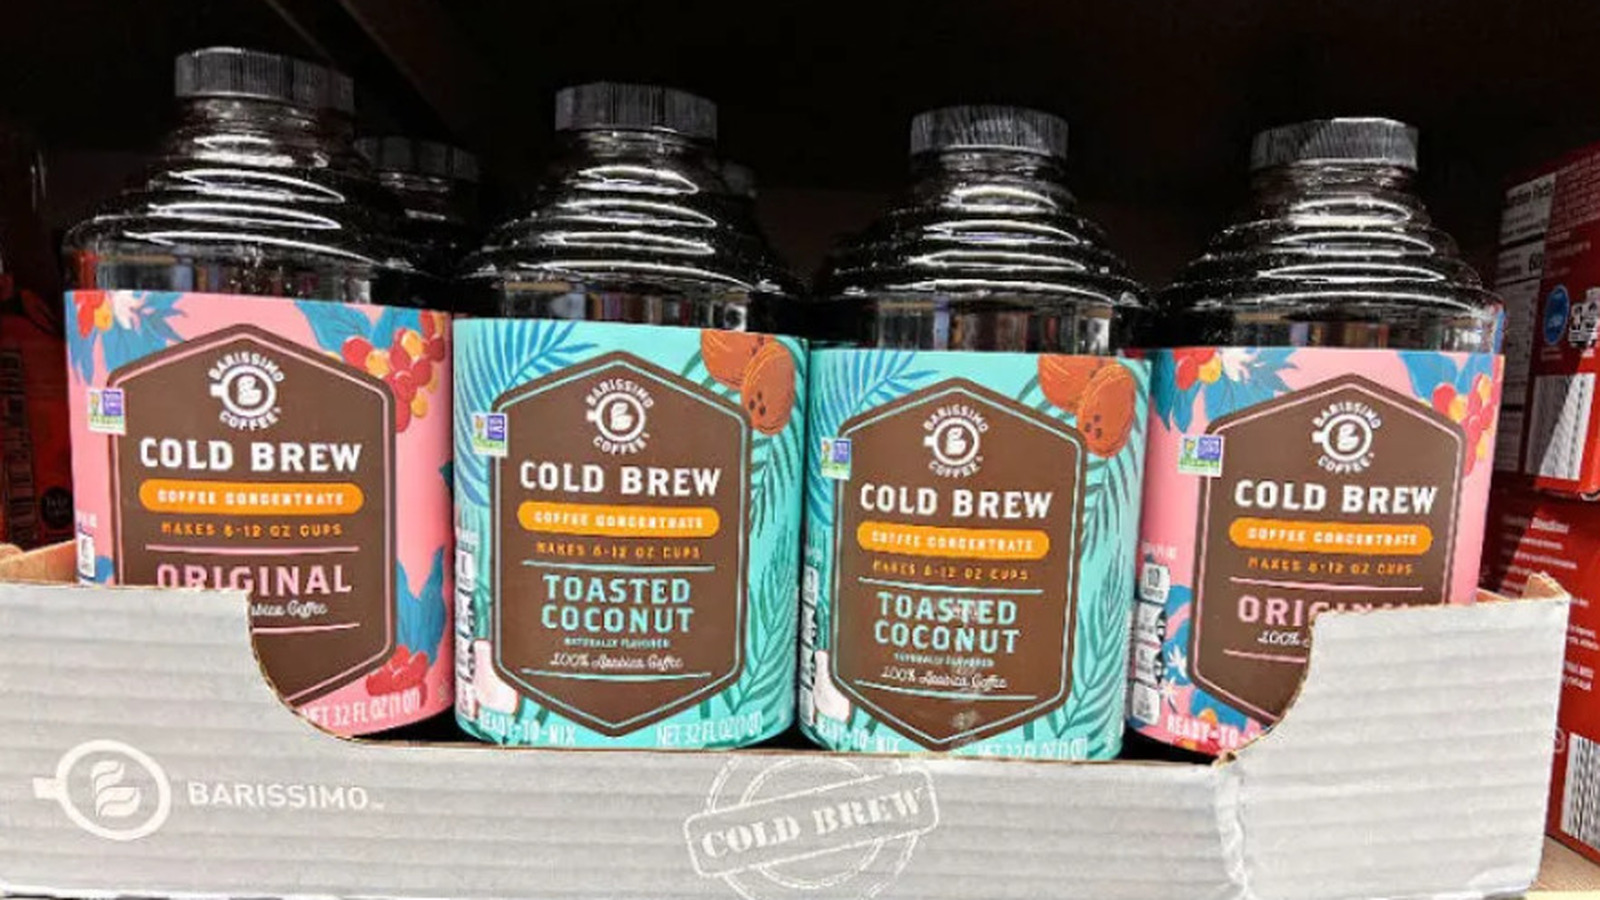 https://www.thedailymeal.com/img/gallery/aldis-toasted-coconut-cold-brew-concentrate-might-rival-trader-joes/l-intro-1689977456.jpg